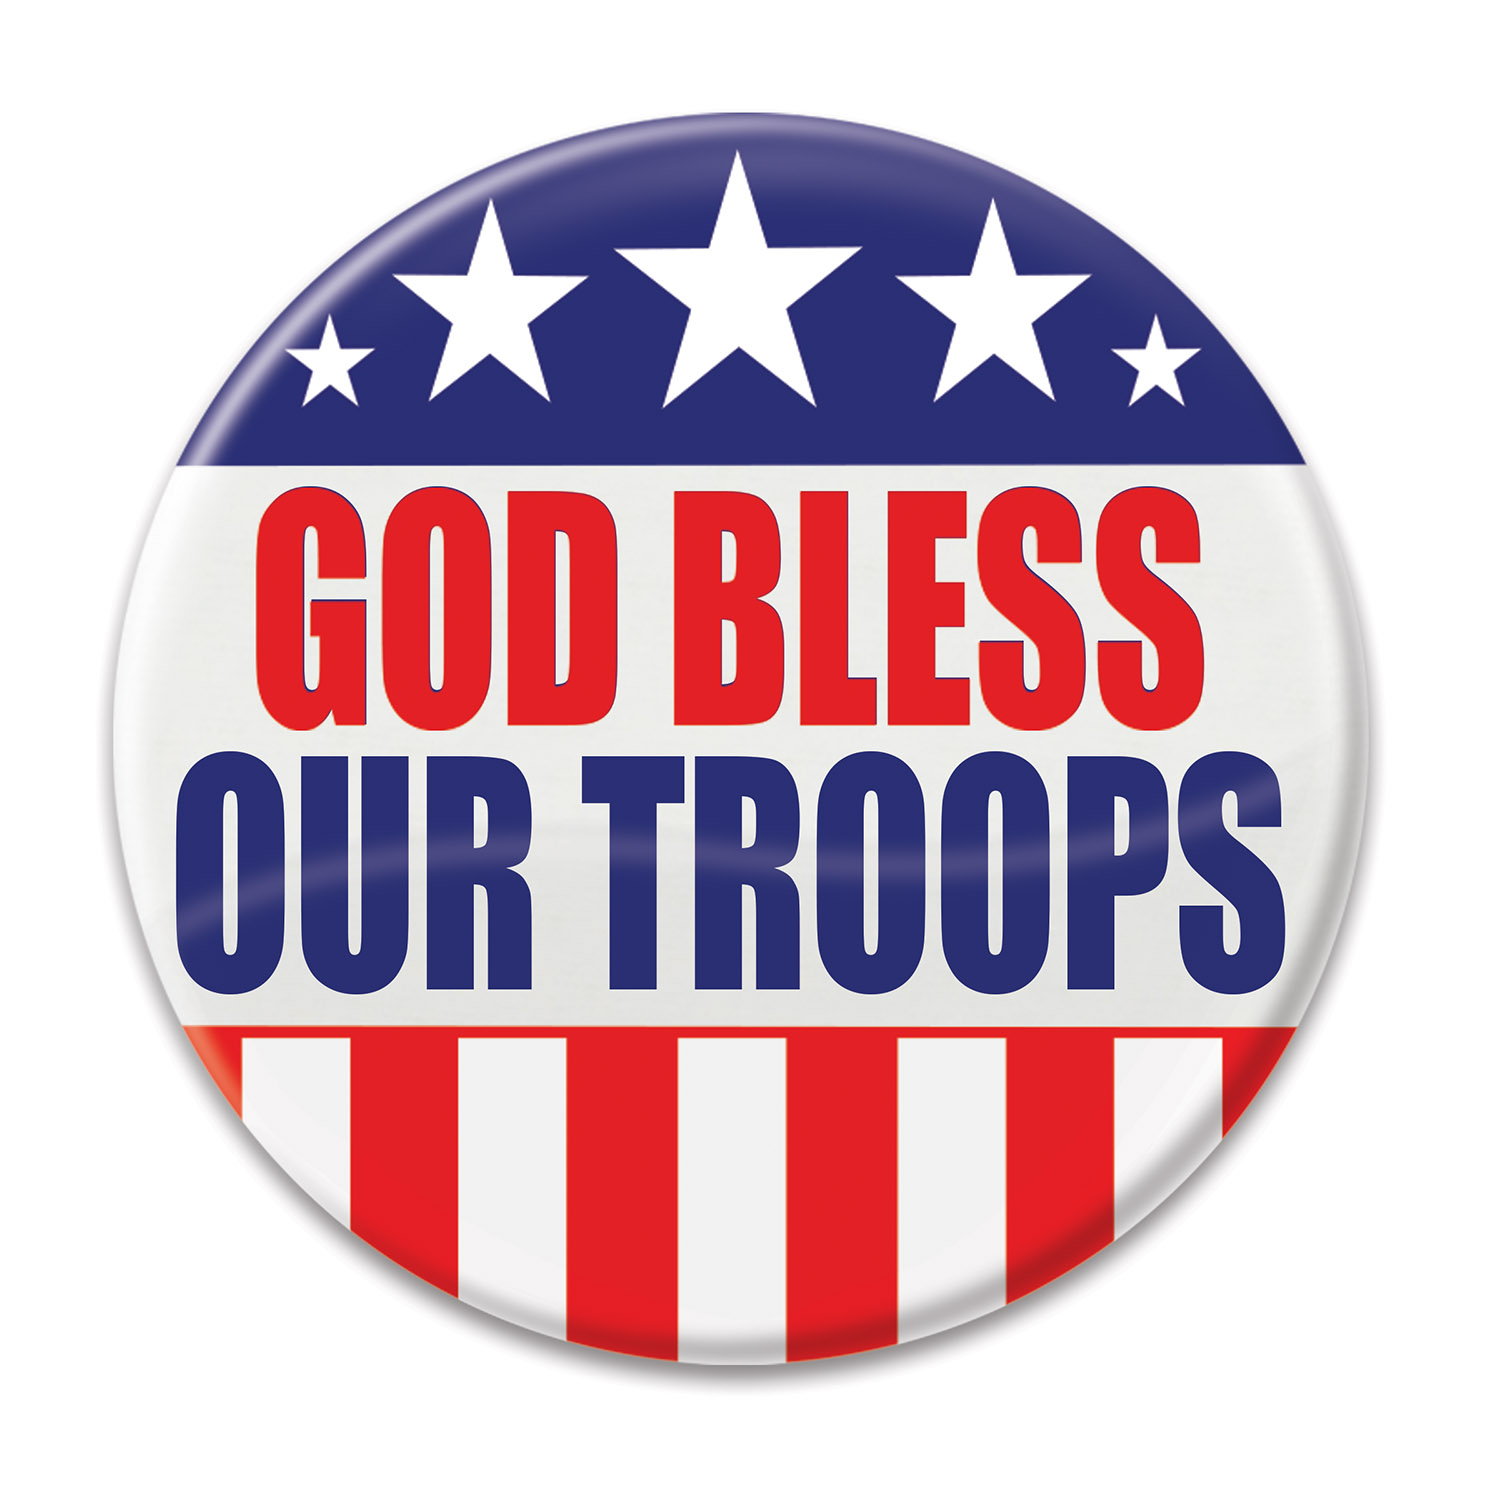 GOD BLESS OUR TROOPS BUTTON (6) image